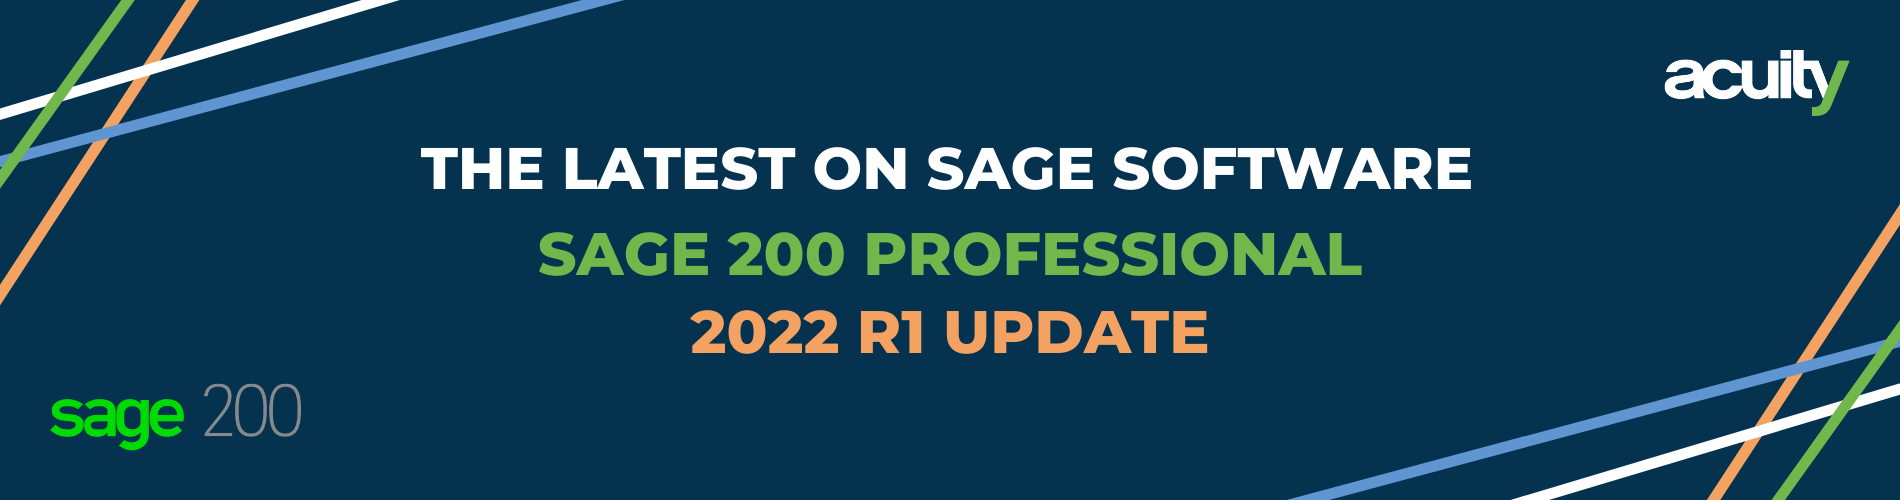 The latest on Sage Software: Sage 200 Professional 2022 R1 Update